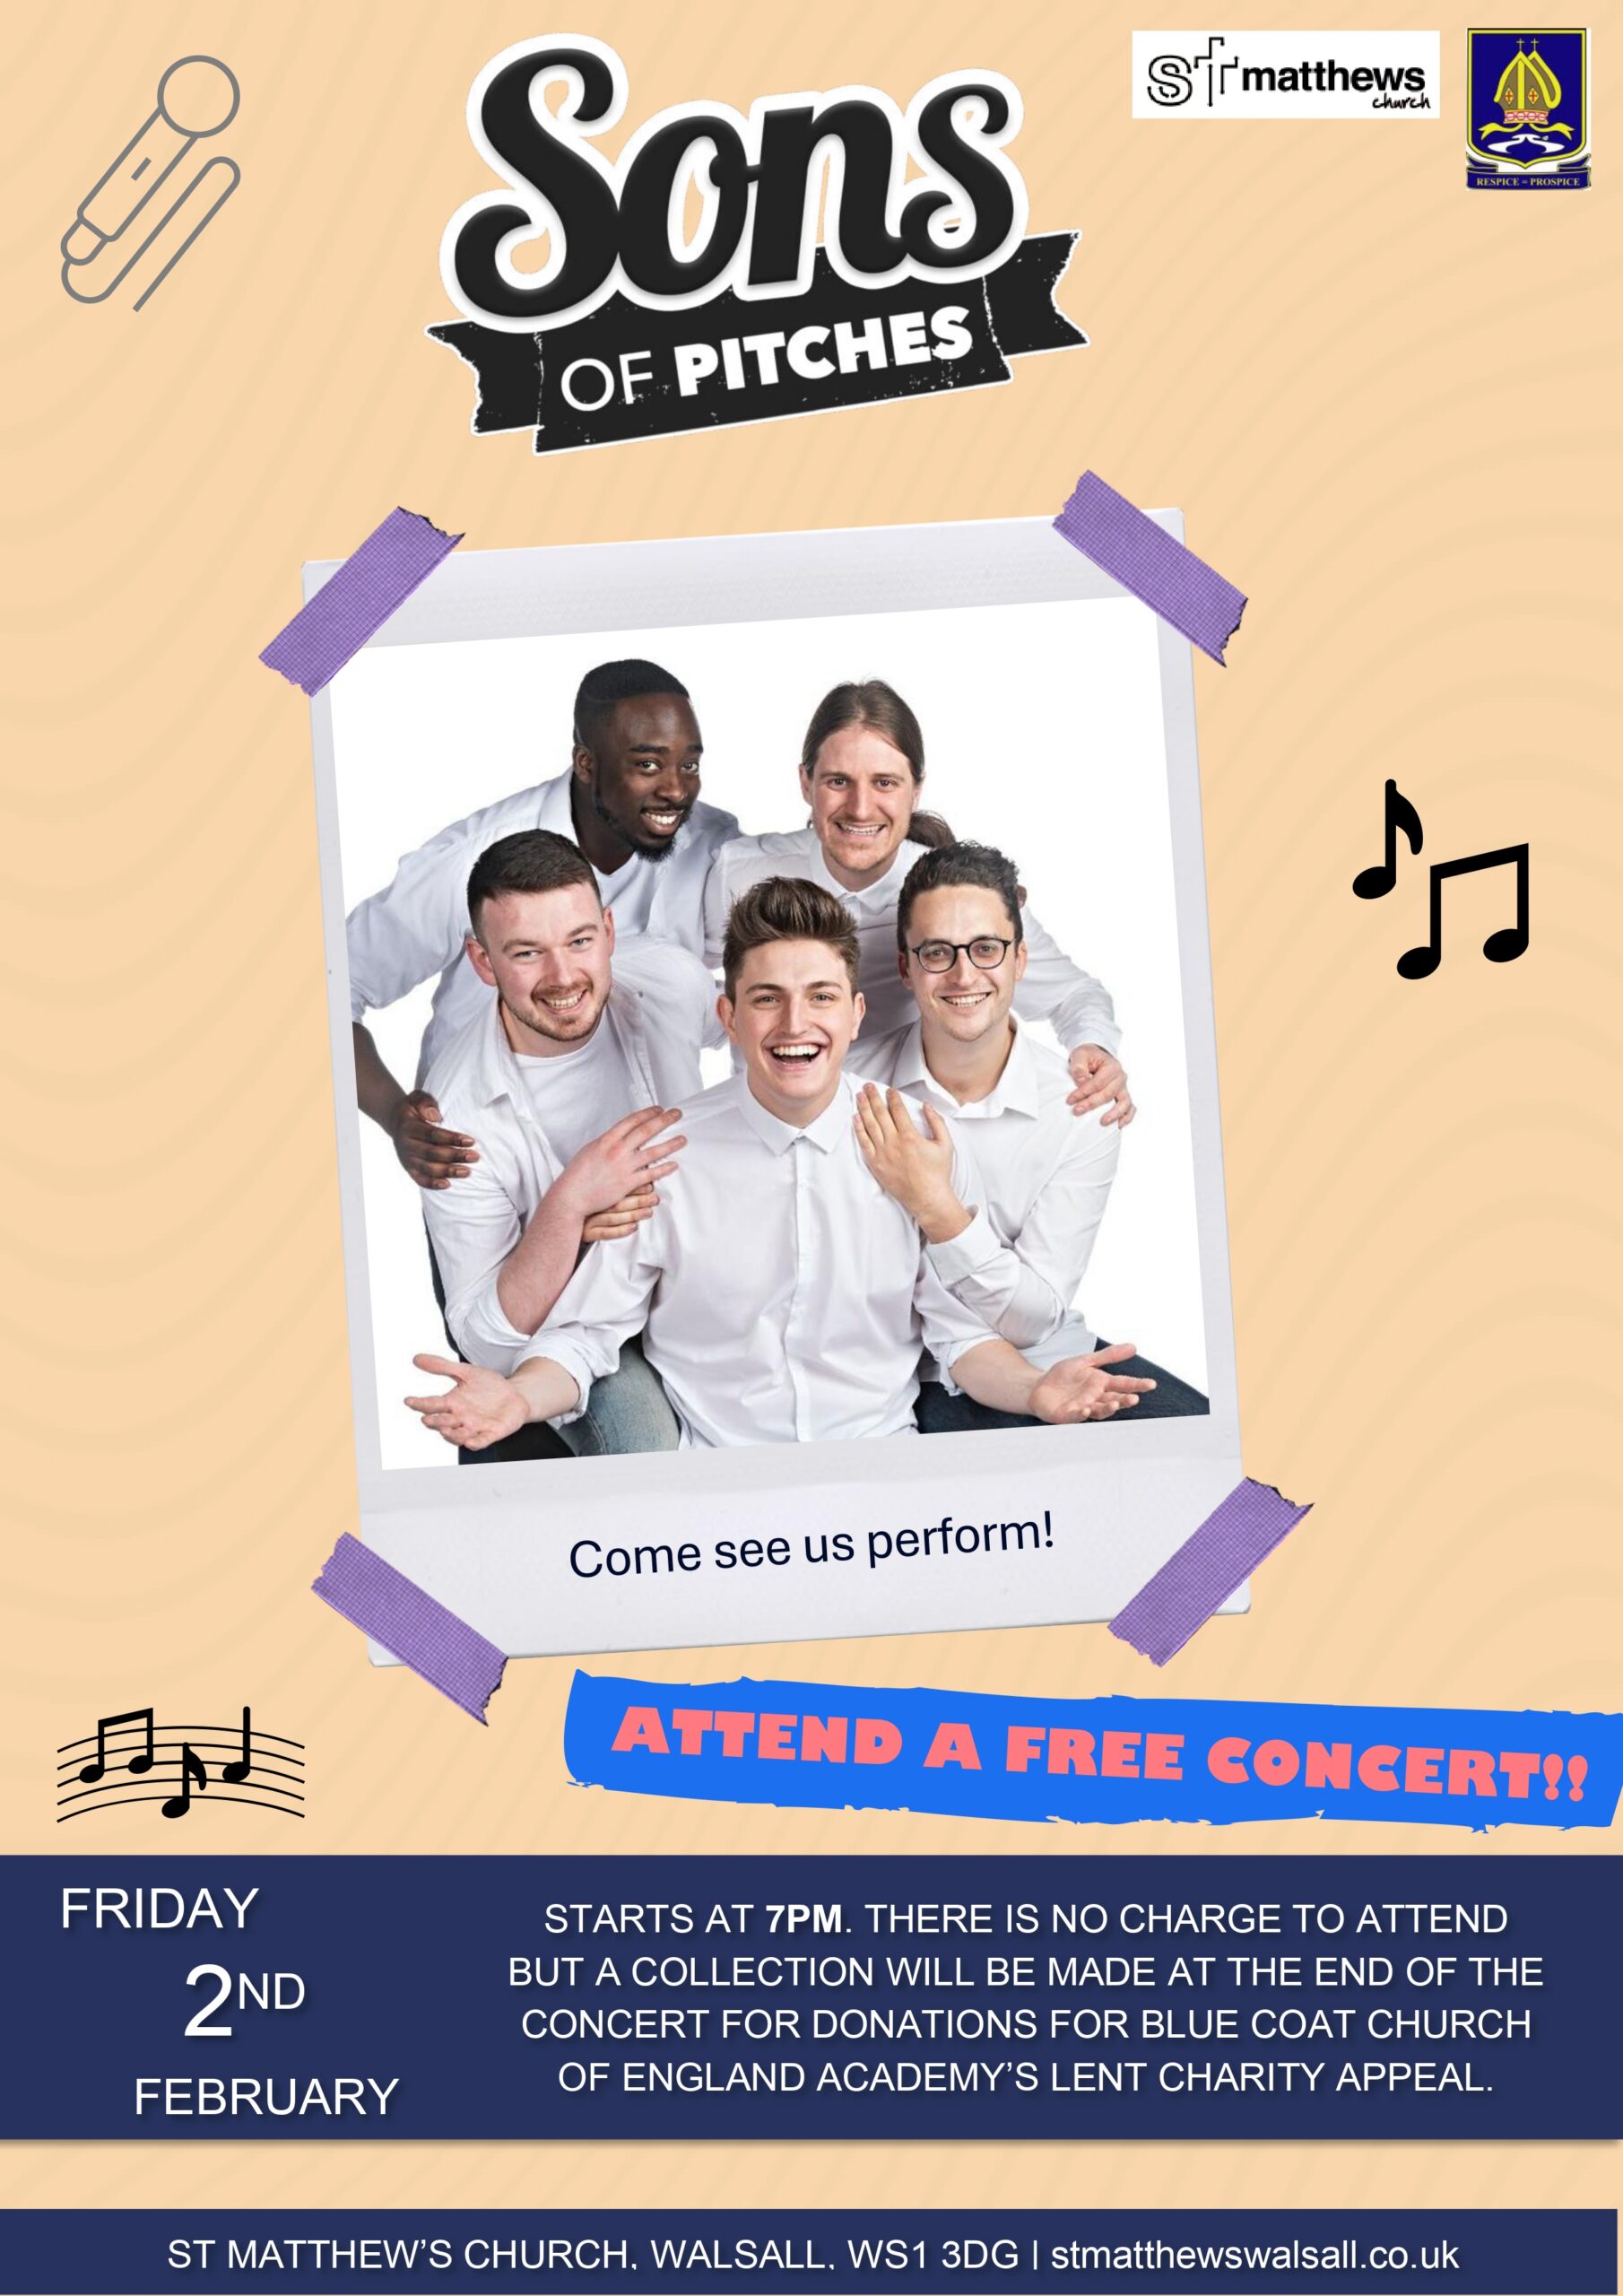 Sons of Pitches logo at the top of the page, with a polaroid style photo of the group in the middle, with text underneath saying 'come and see us perform!'. 'Attend a free concert!'